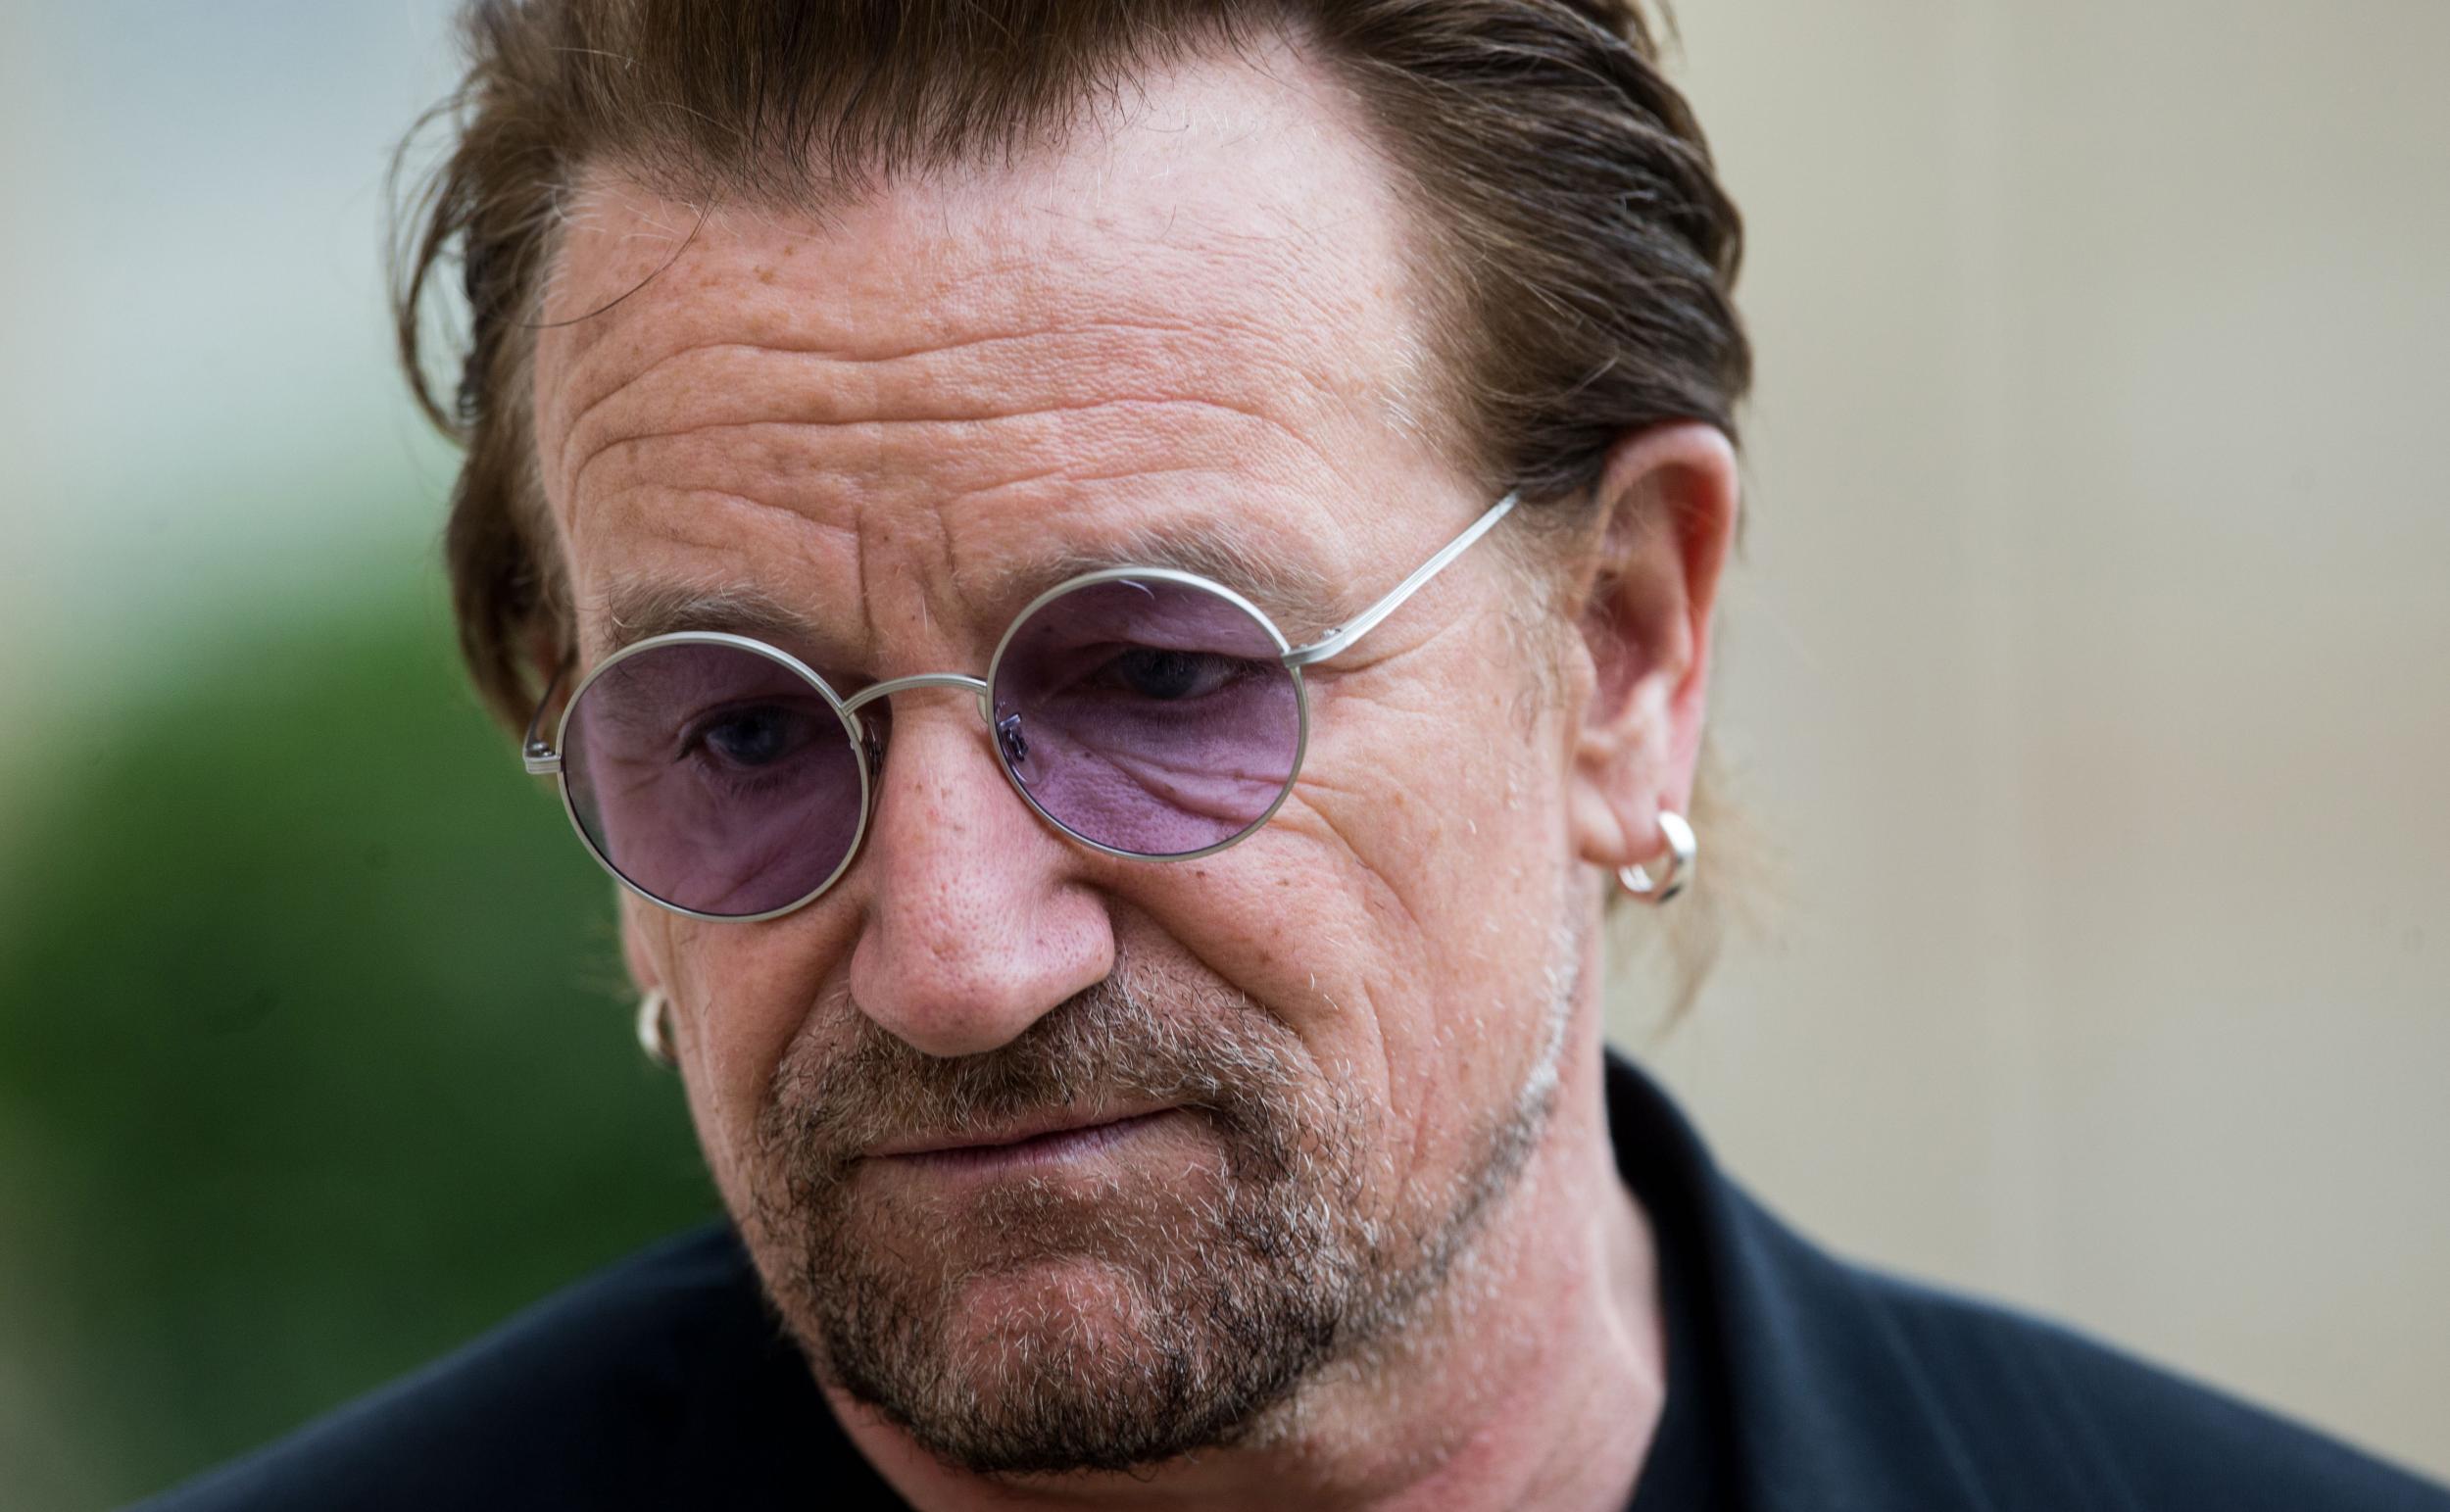 bono-apologises-after-his-charity-is-hit-by-bullying-allegations-we